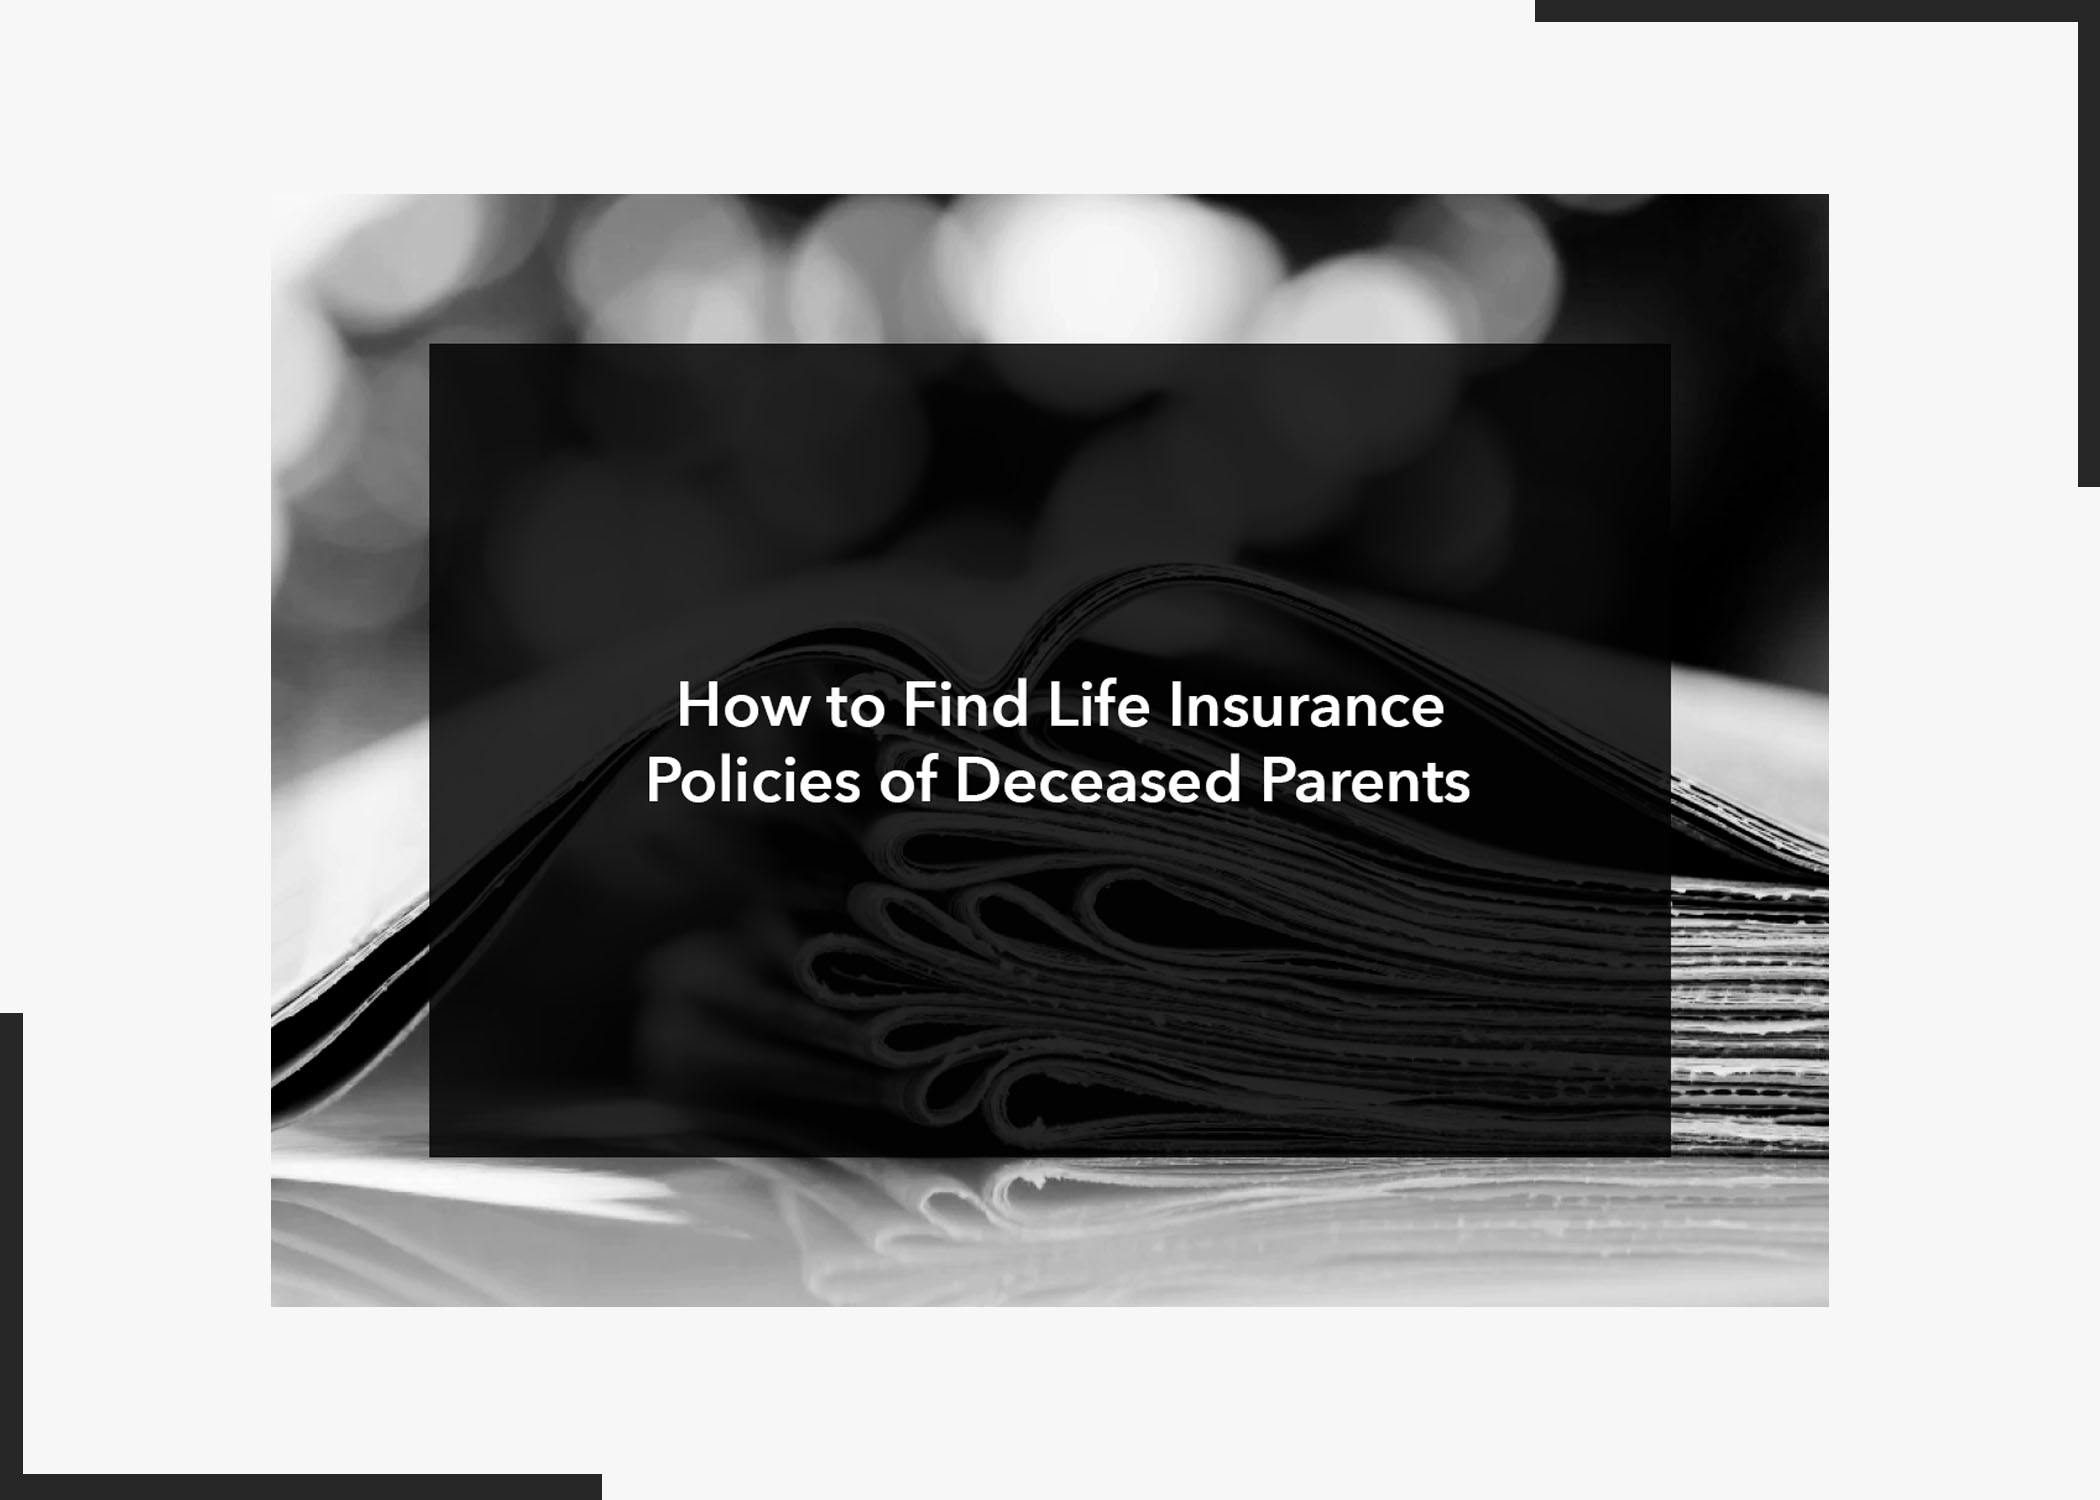 How to Find Life Insurance Policies of Deceased Parents